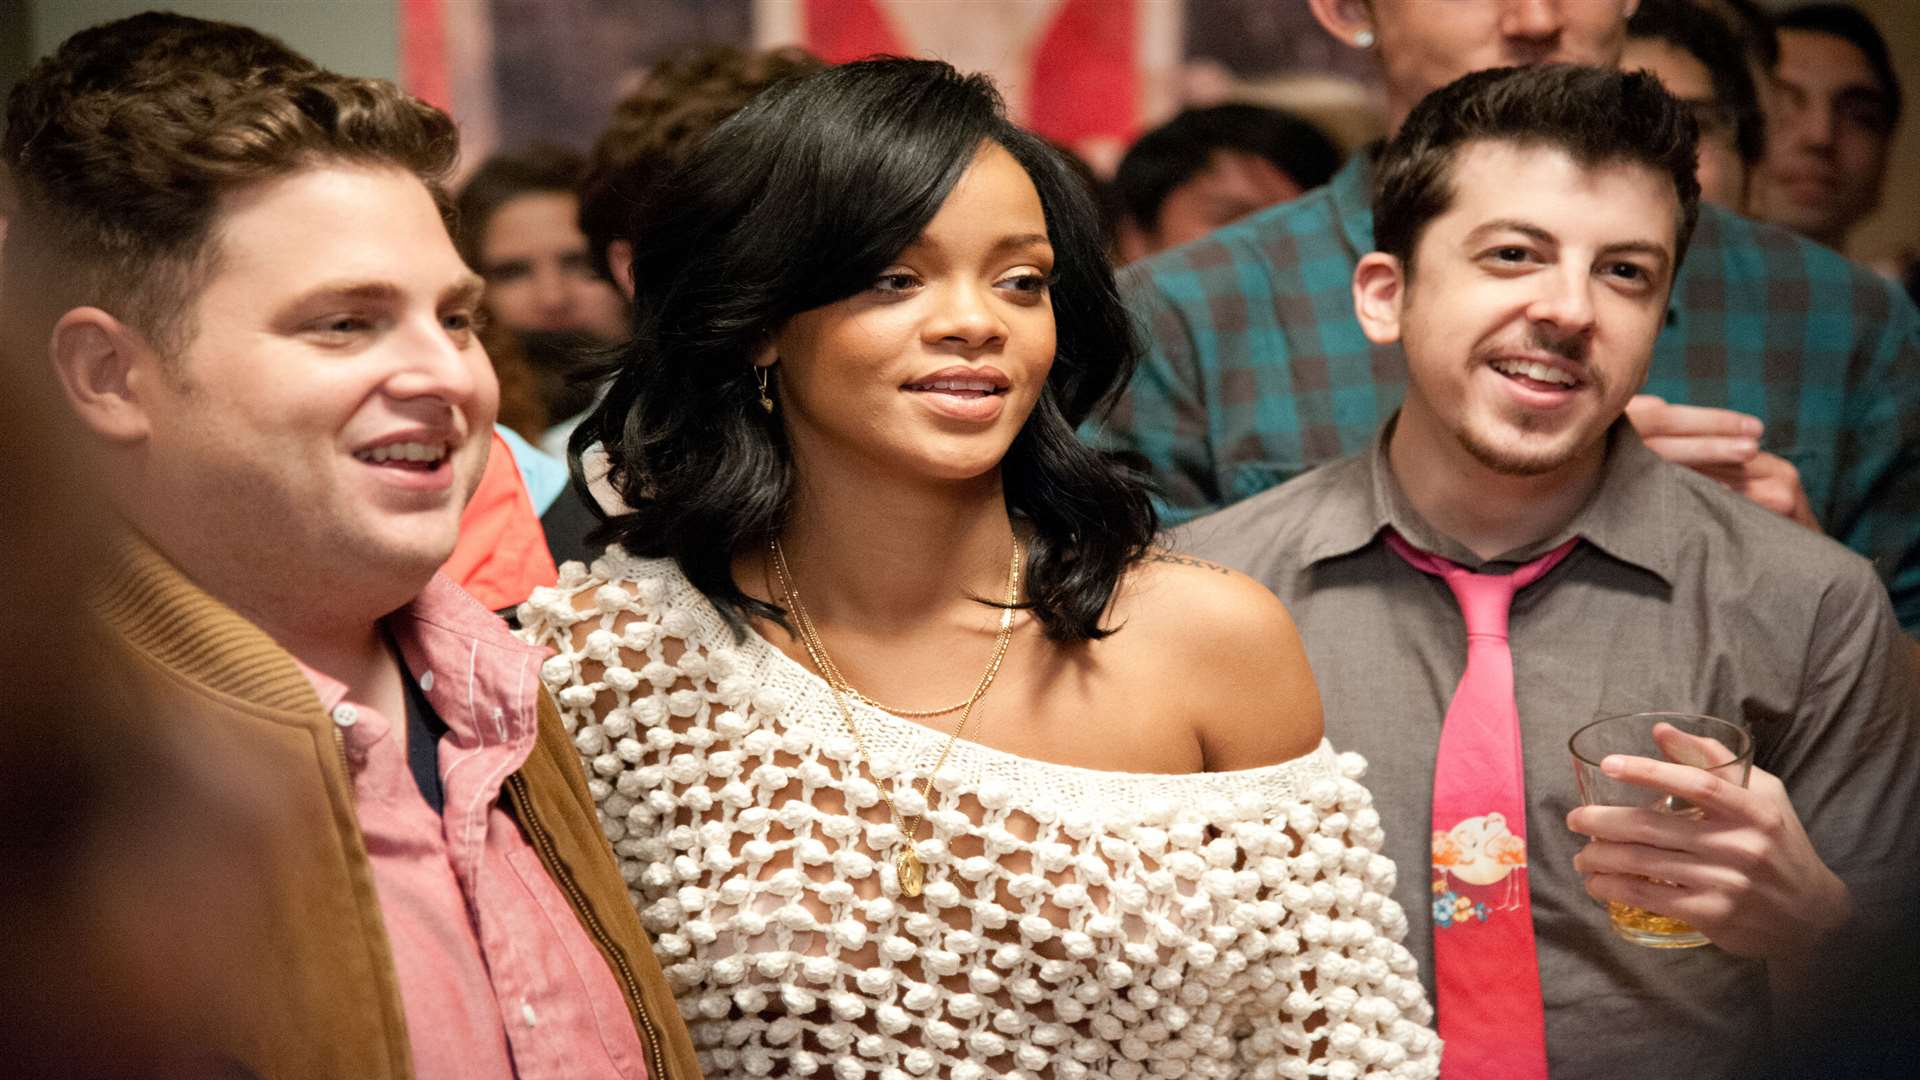 Jonah Hill, Rihanna & Christopher Mintz-Plasse in This Is The End. Picture: PA Photo/Sony UK